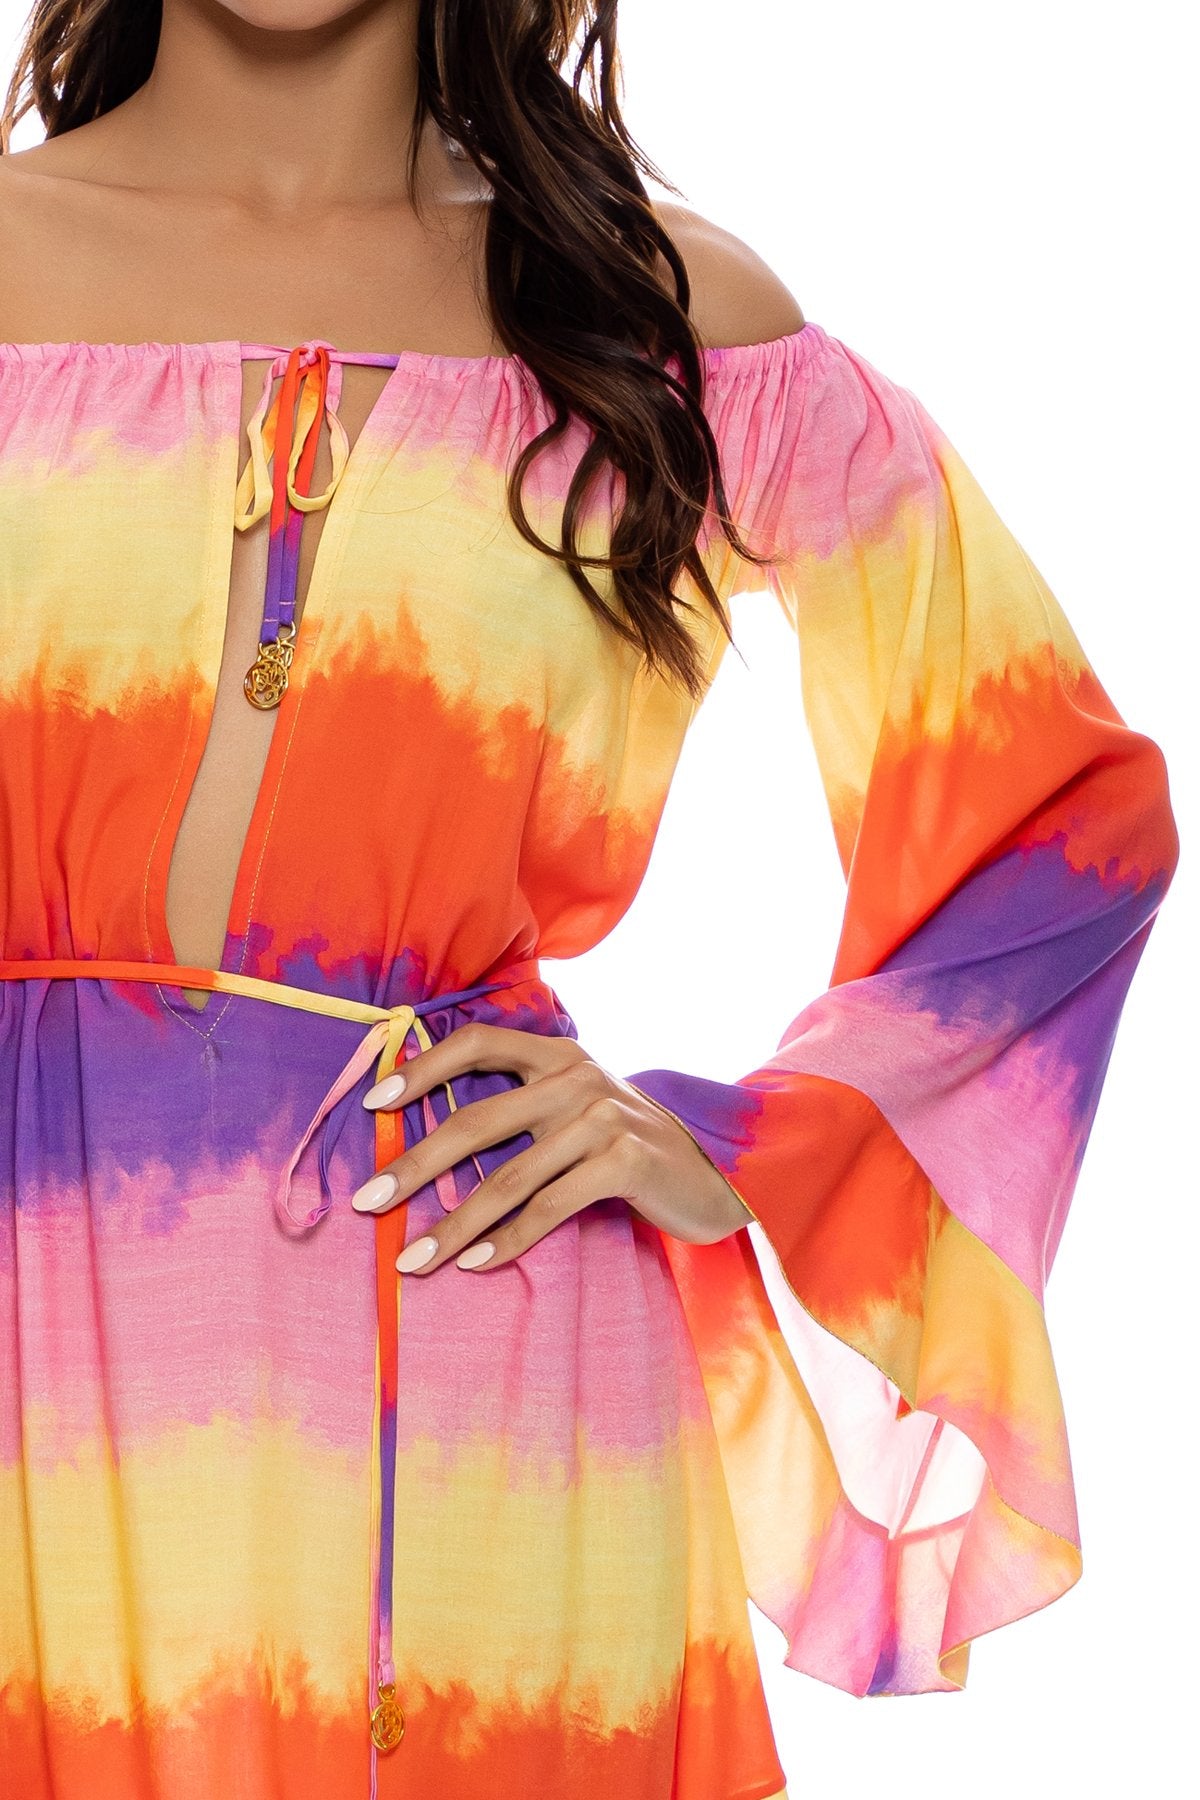 MIAMI SUNSETS - Off The Shoulder Ruffle Dress • Multicolor